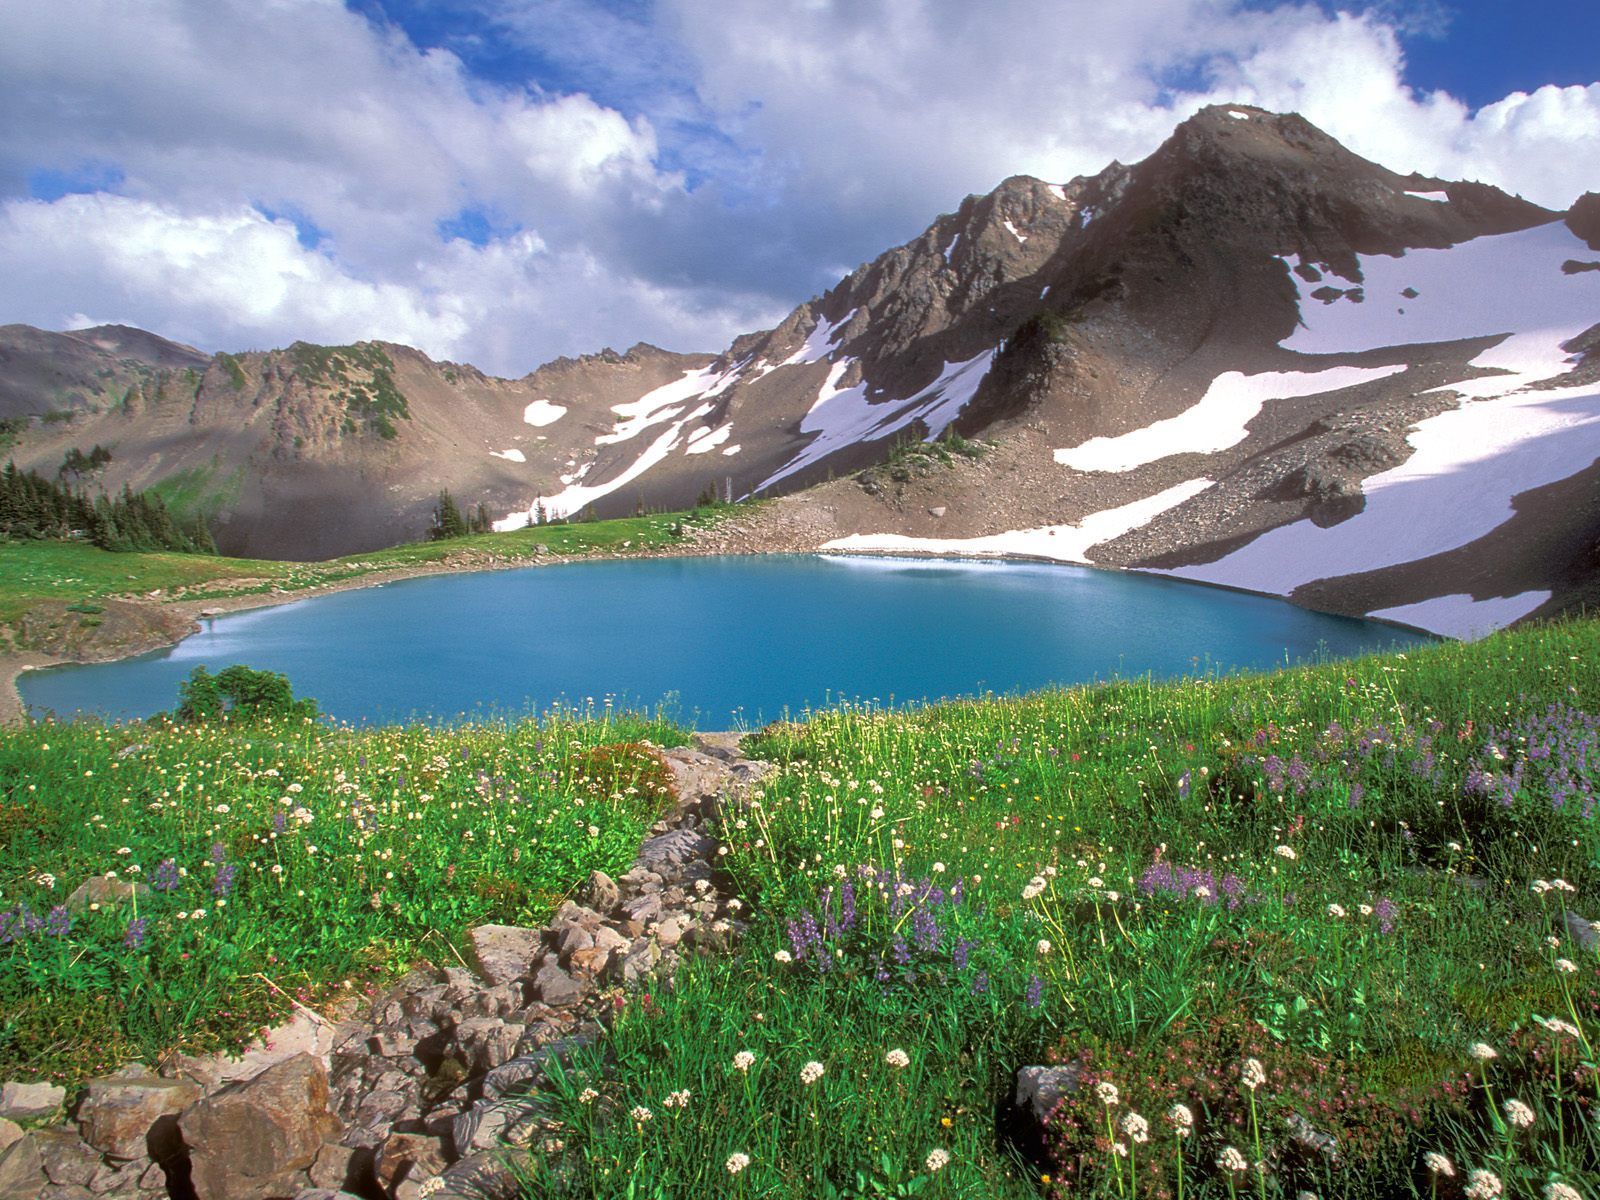 alps, greens, nature, stones, mountains, lake, national park, blue water Full HD